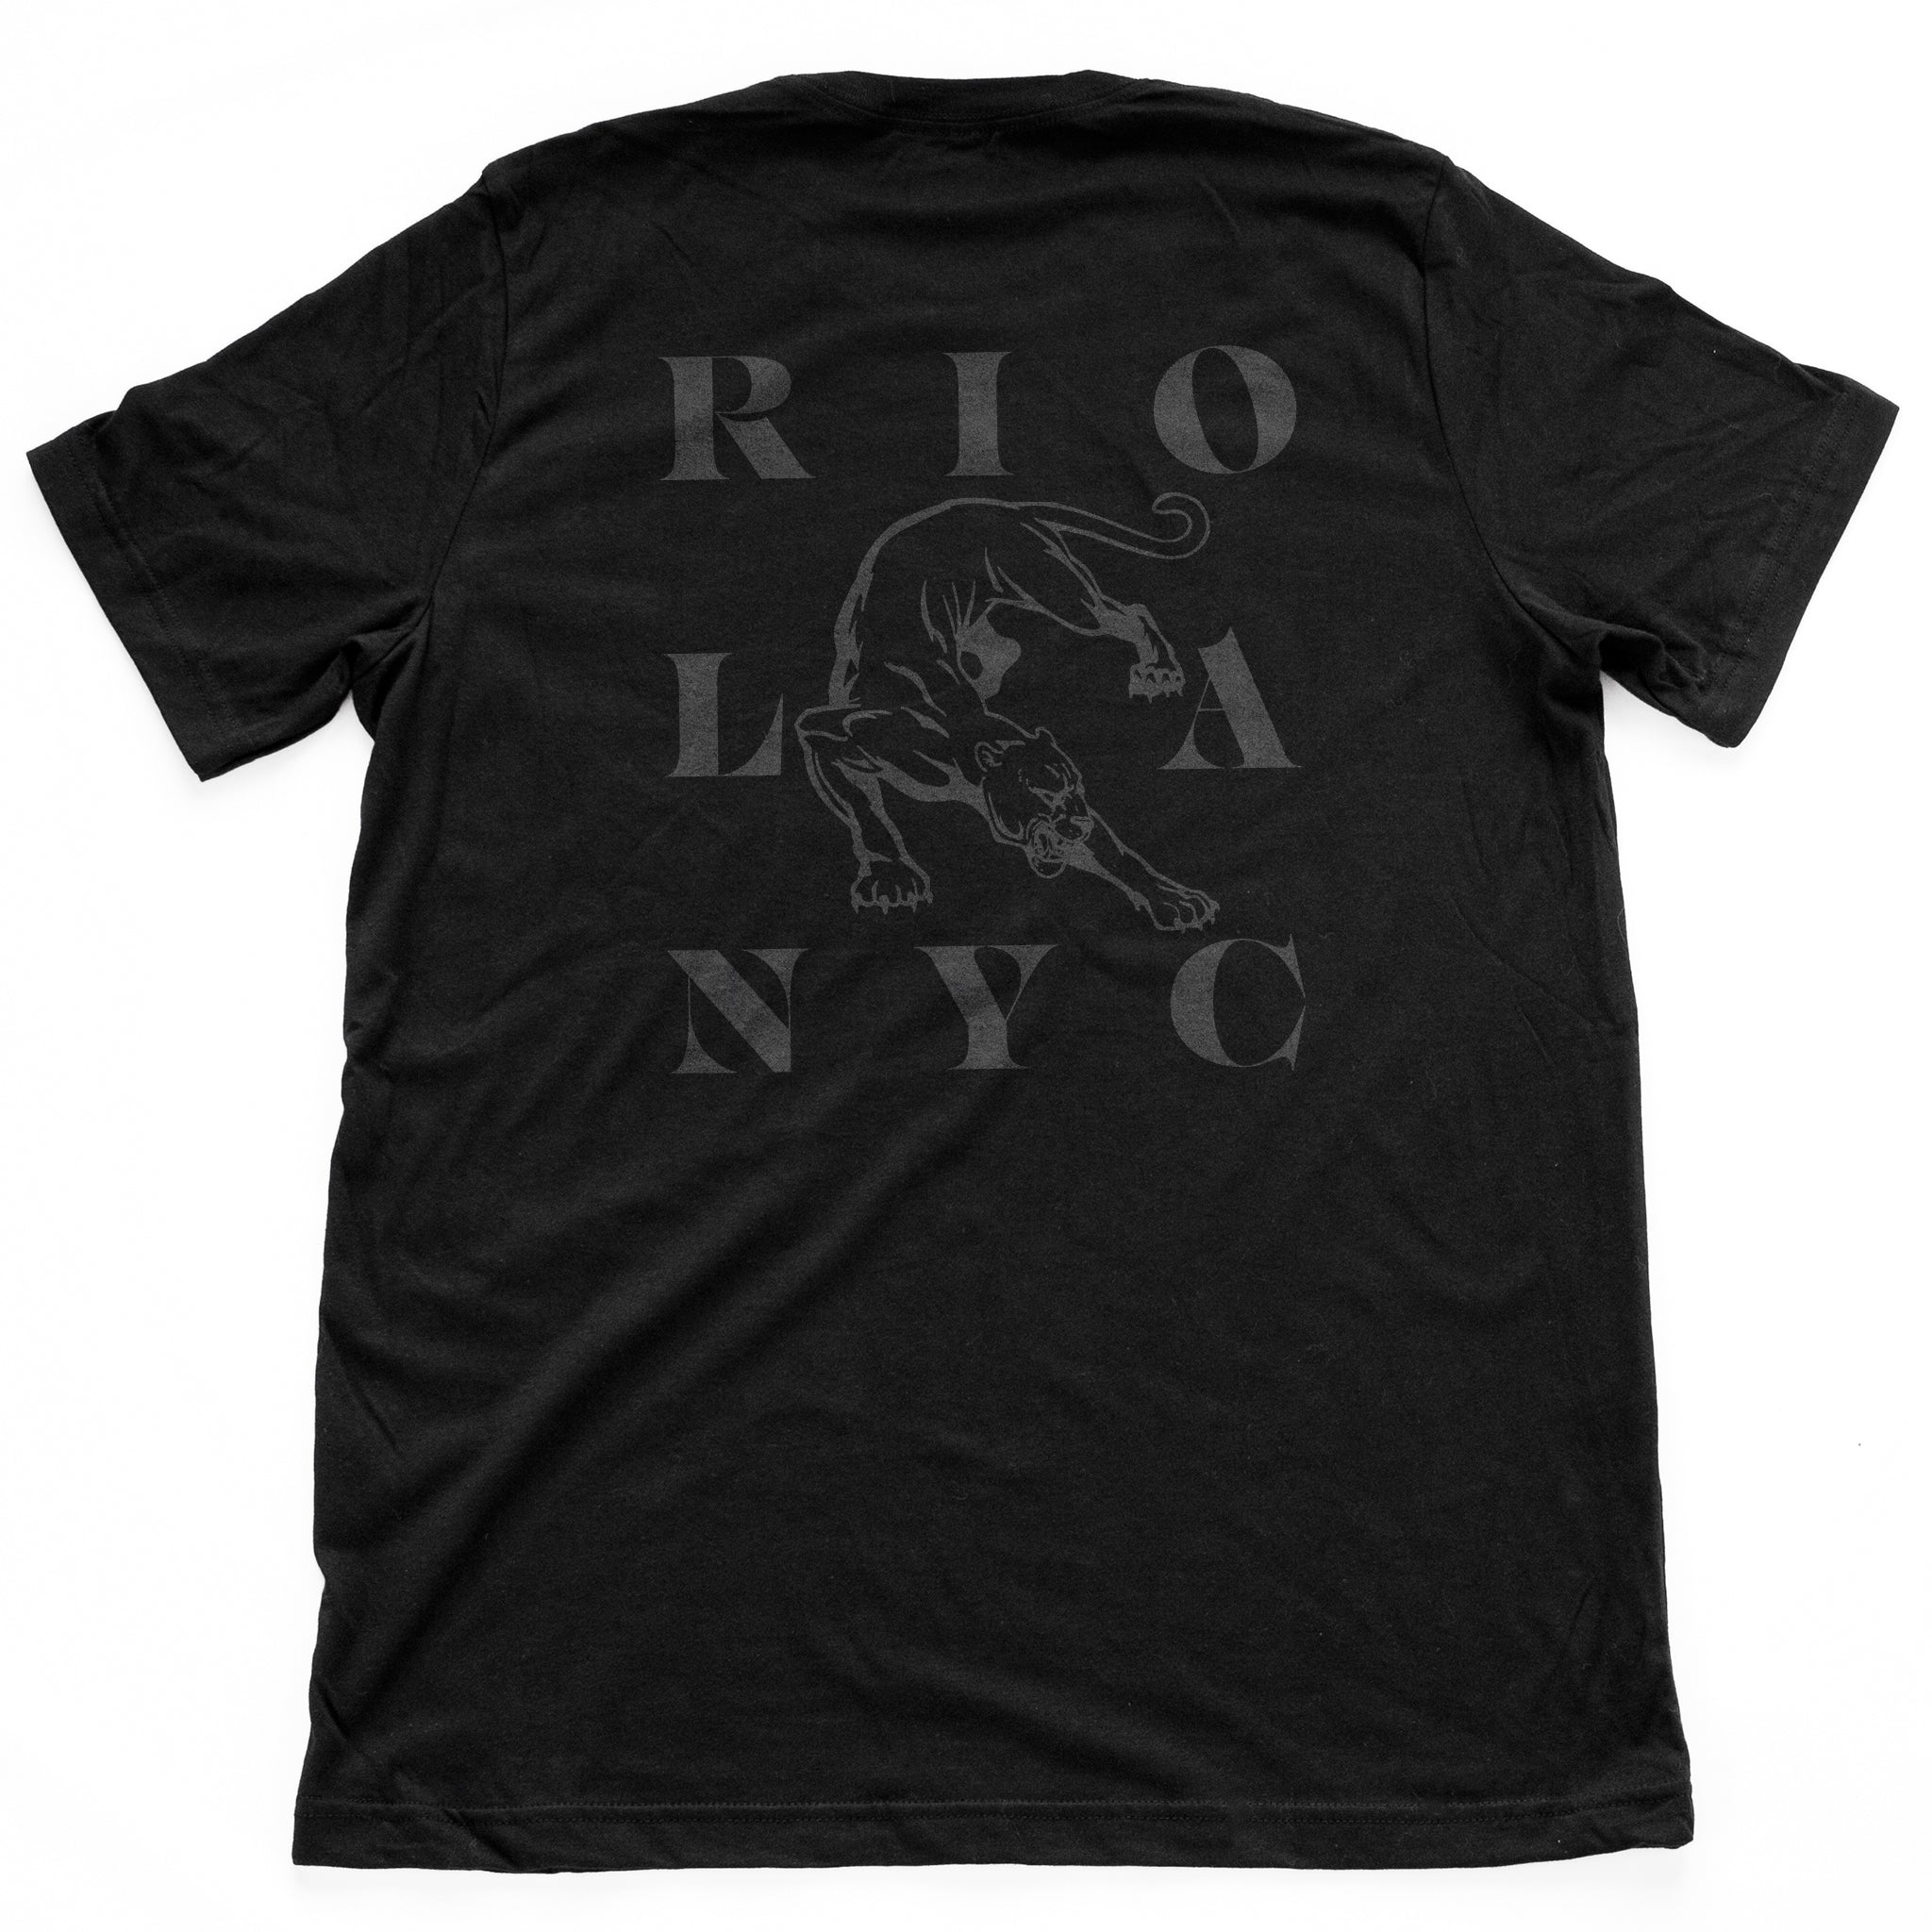 The back of a graphic t-shirt for the Wolfsaint brand, with a big panther surrounded by Wolfsaint cities NYC, LA, and Rio on the back. In Classic Black. From Wolfsaint.net 